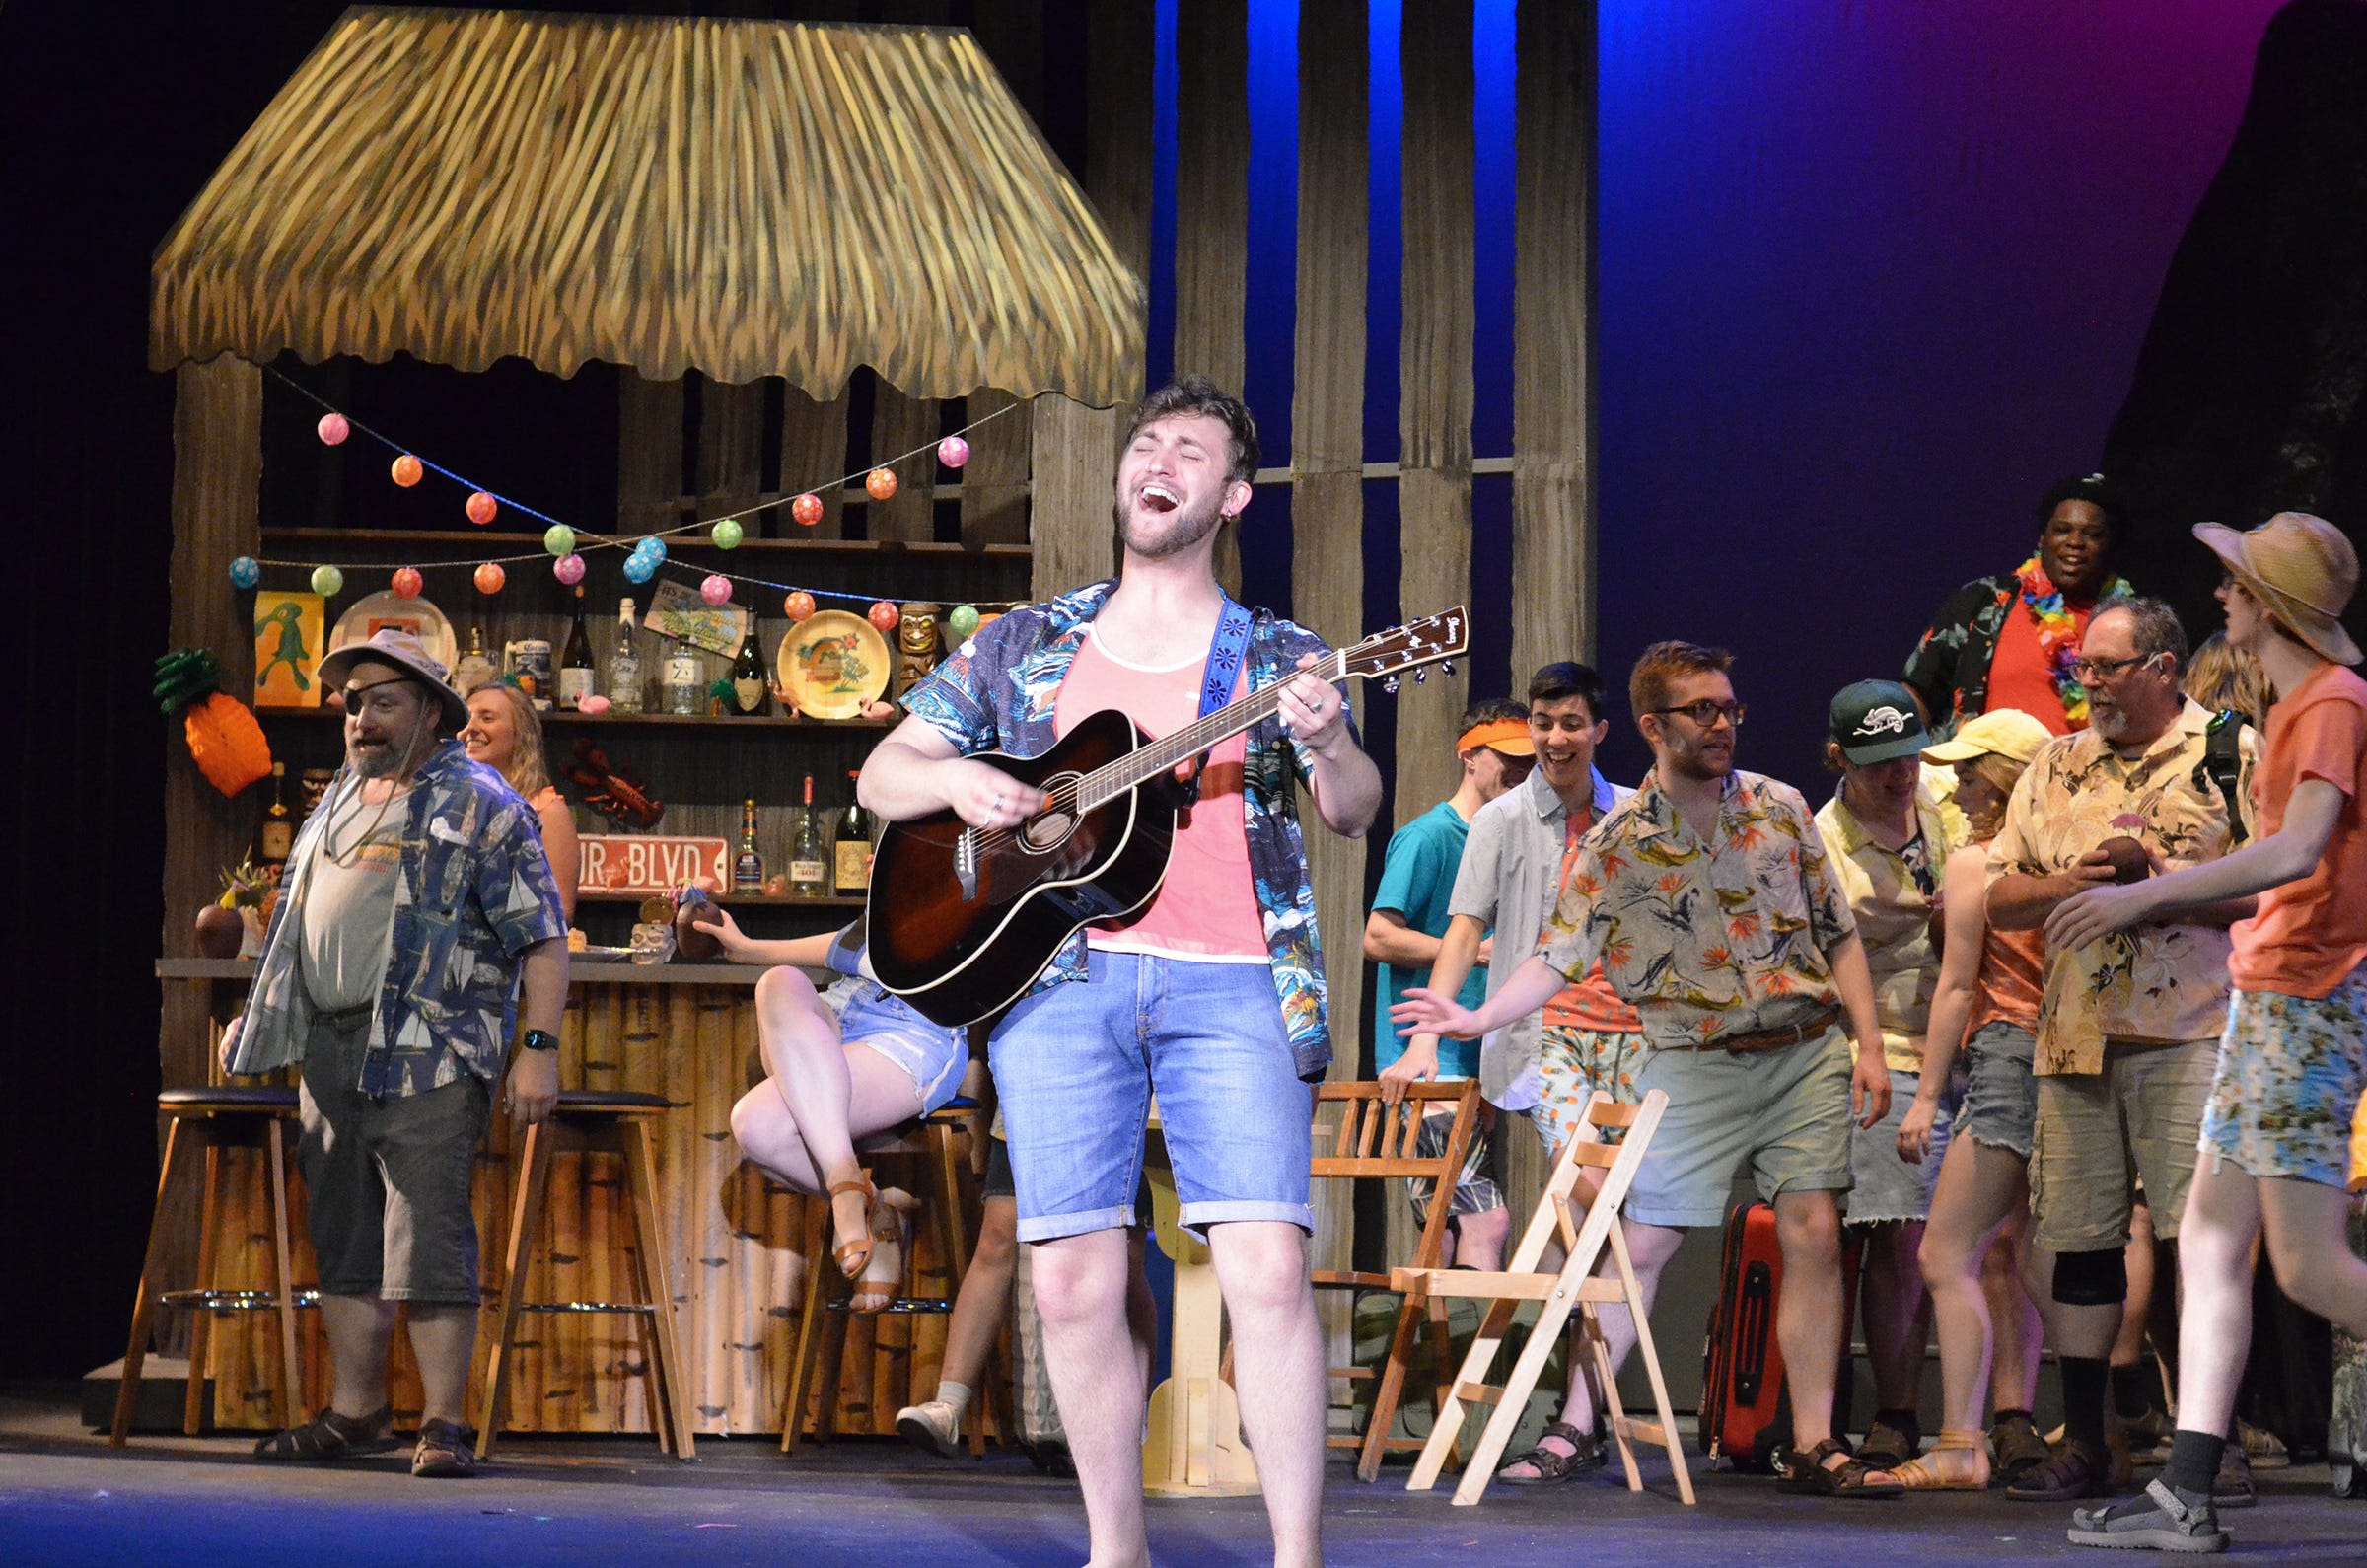 Jimmy Buffett tunes tell story of 'Escape to Margaritaville' at Croswell Opera House